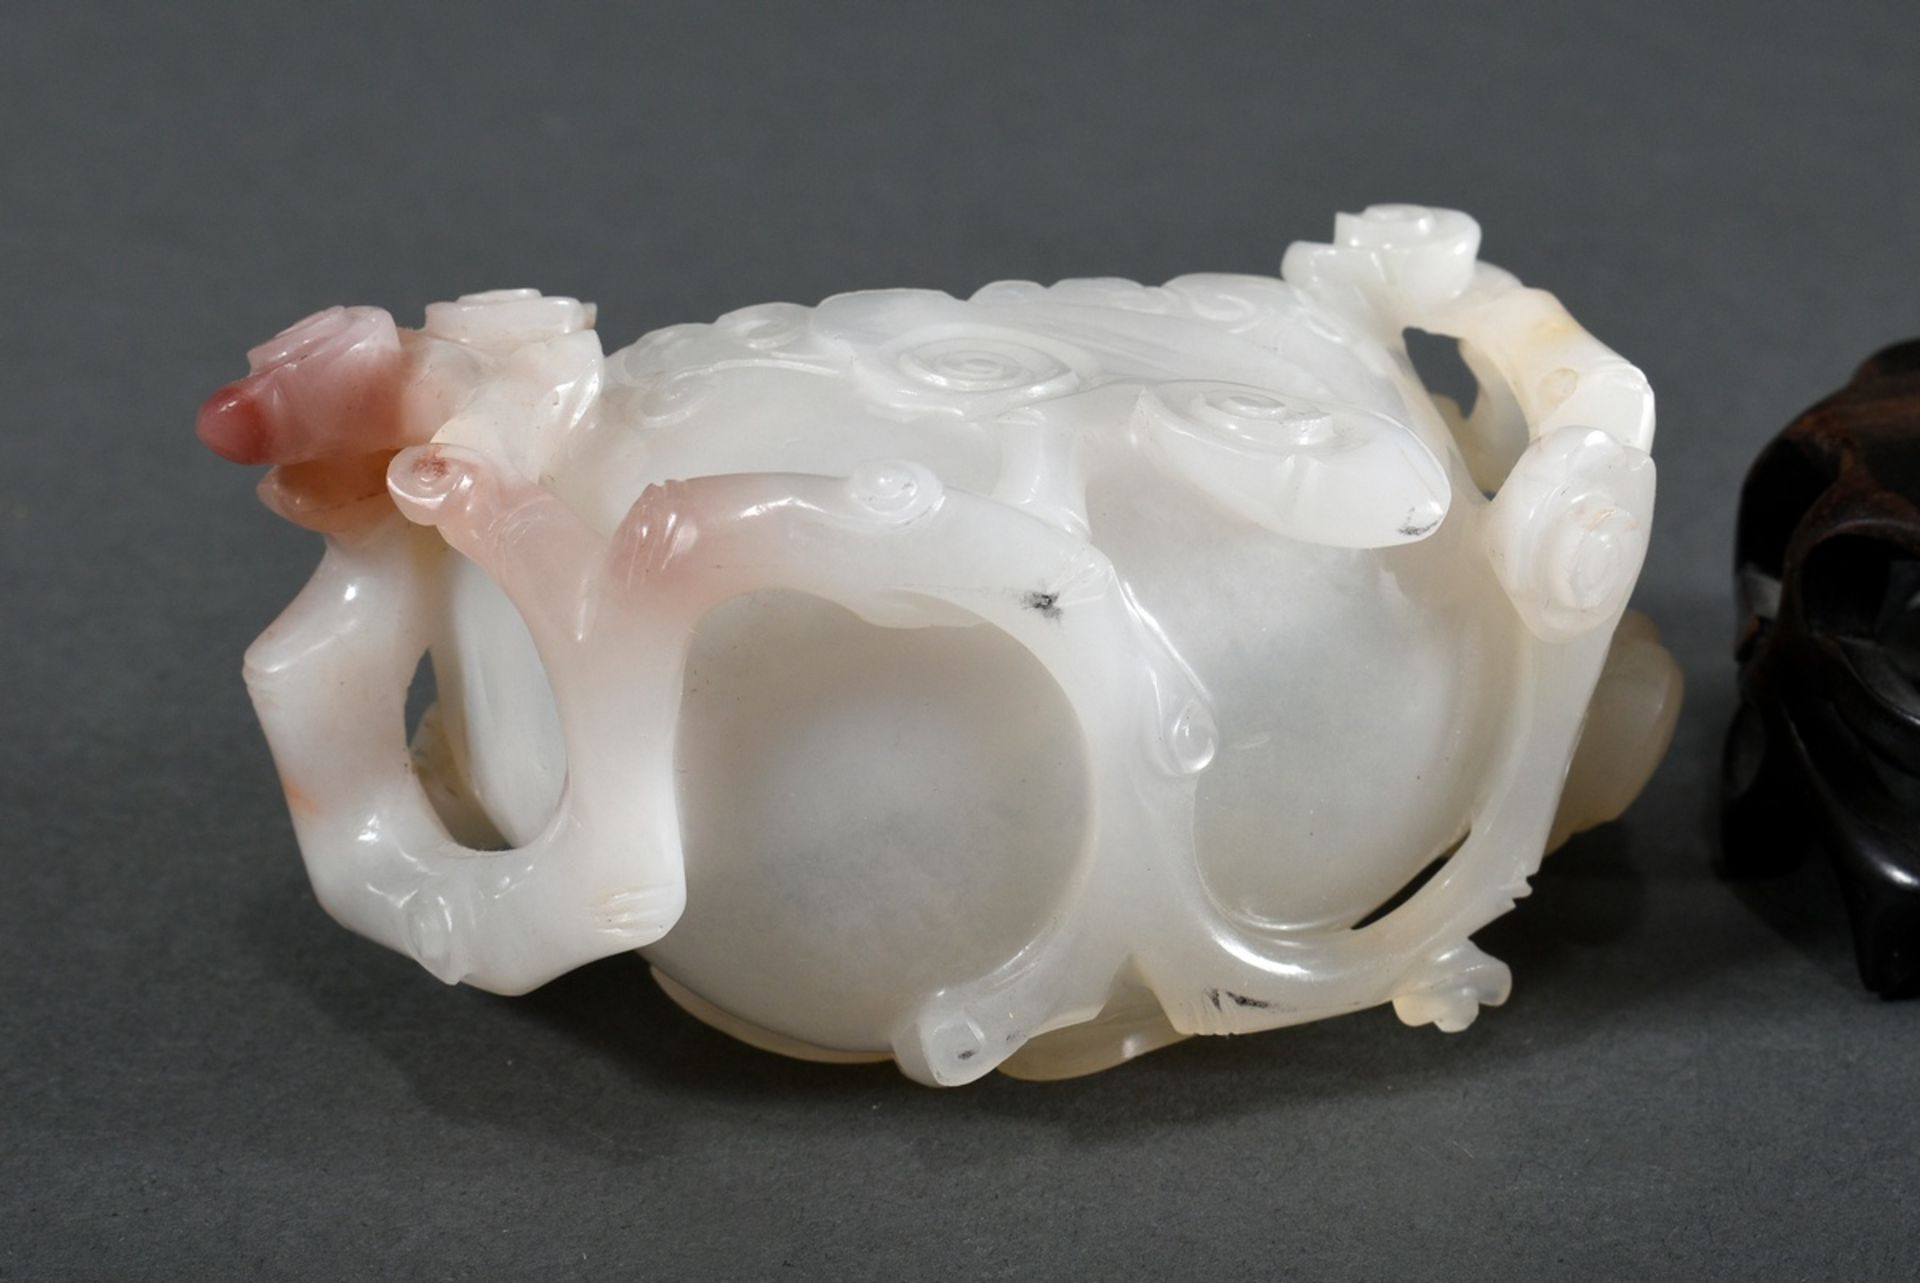 Light rose coloured jade brush washer with "Lingzhi mushrooms" on carved wooden base, 4,5x10x5cm, s - Image 4 of 5